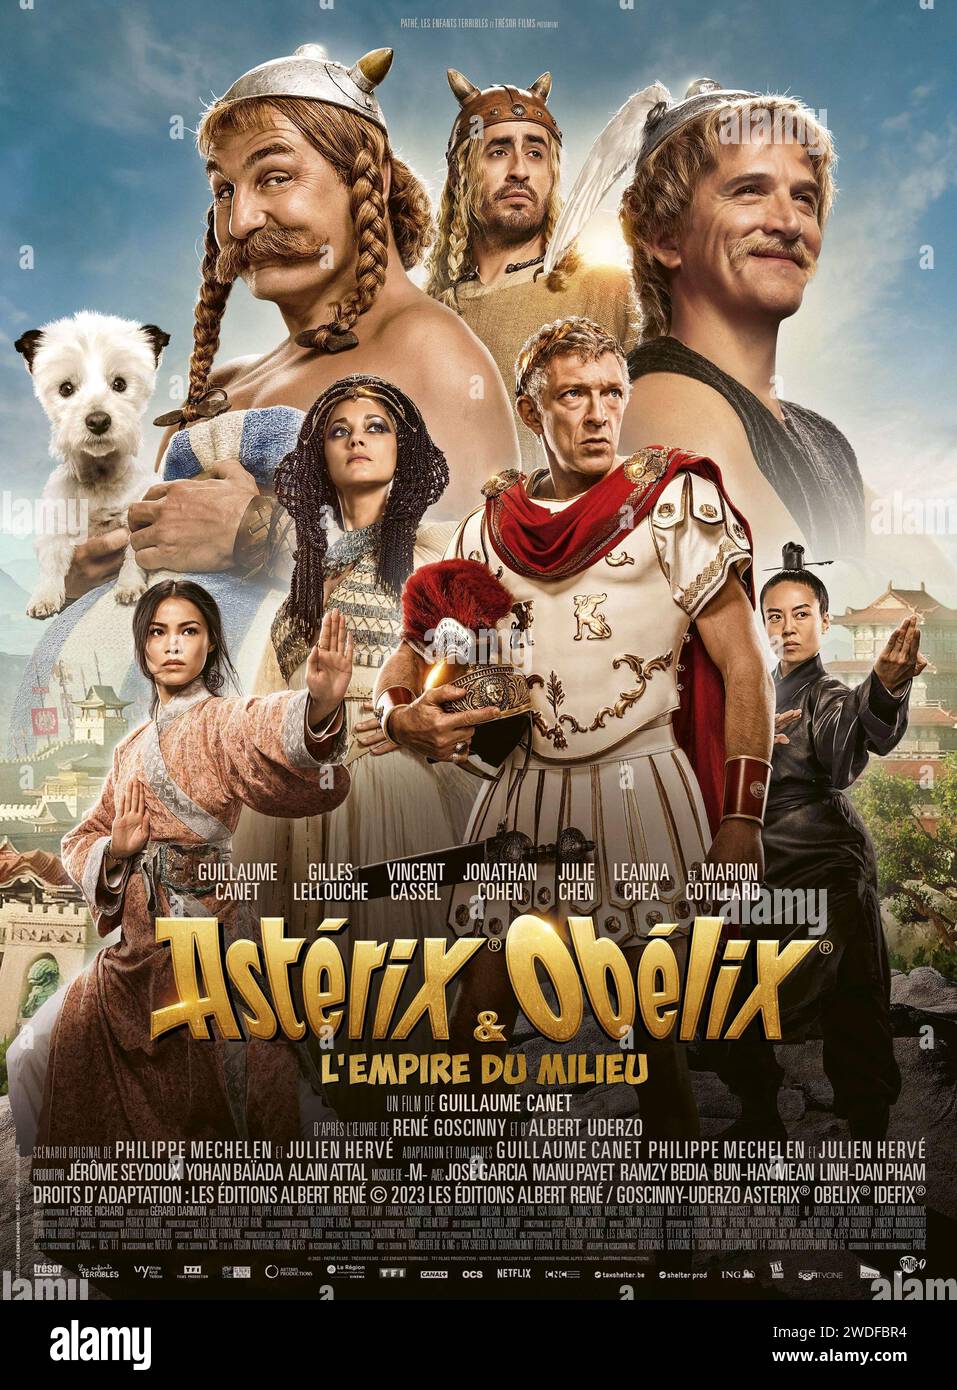 Asterix & Obelix: The Middle Kingdom (2023) directed by Guillaume Canet and starring Guillaume Canet, Gilles Lellouche and Vincent Cassel. The only daughter of the Chinese emperor Han Xuandi, escapes from a strict prince and seeks help from the Gauls and the two brave warriors Asterix and Obelix. French poster ***EDITORIAL USE ONLY***. Credit: BFA / Pathé Stock Photo